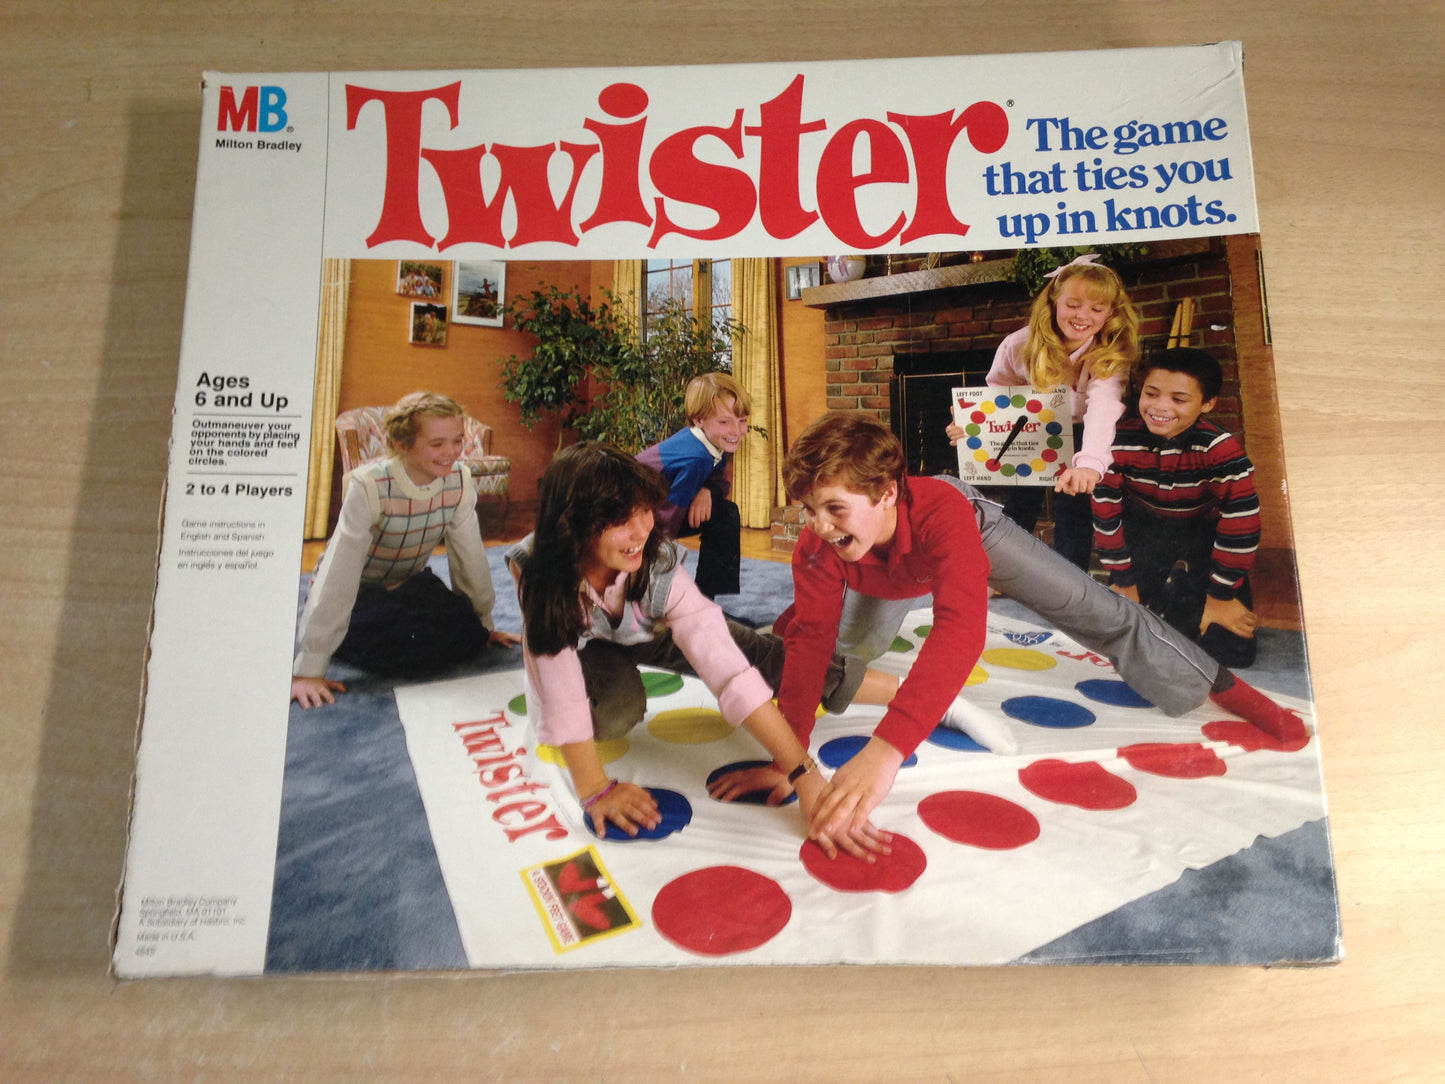 Y Game Twister Vintage Large Size Excellent Condition